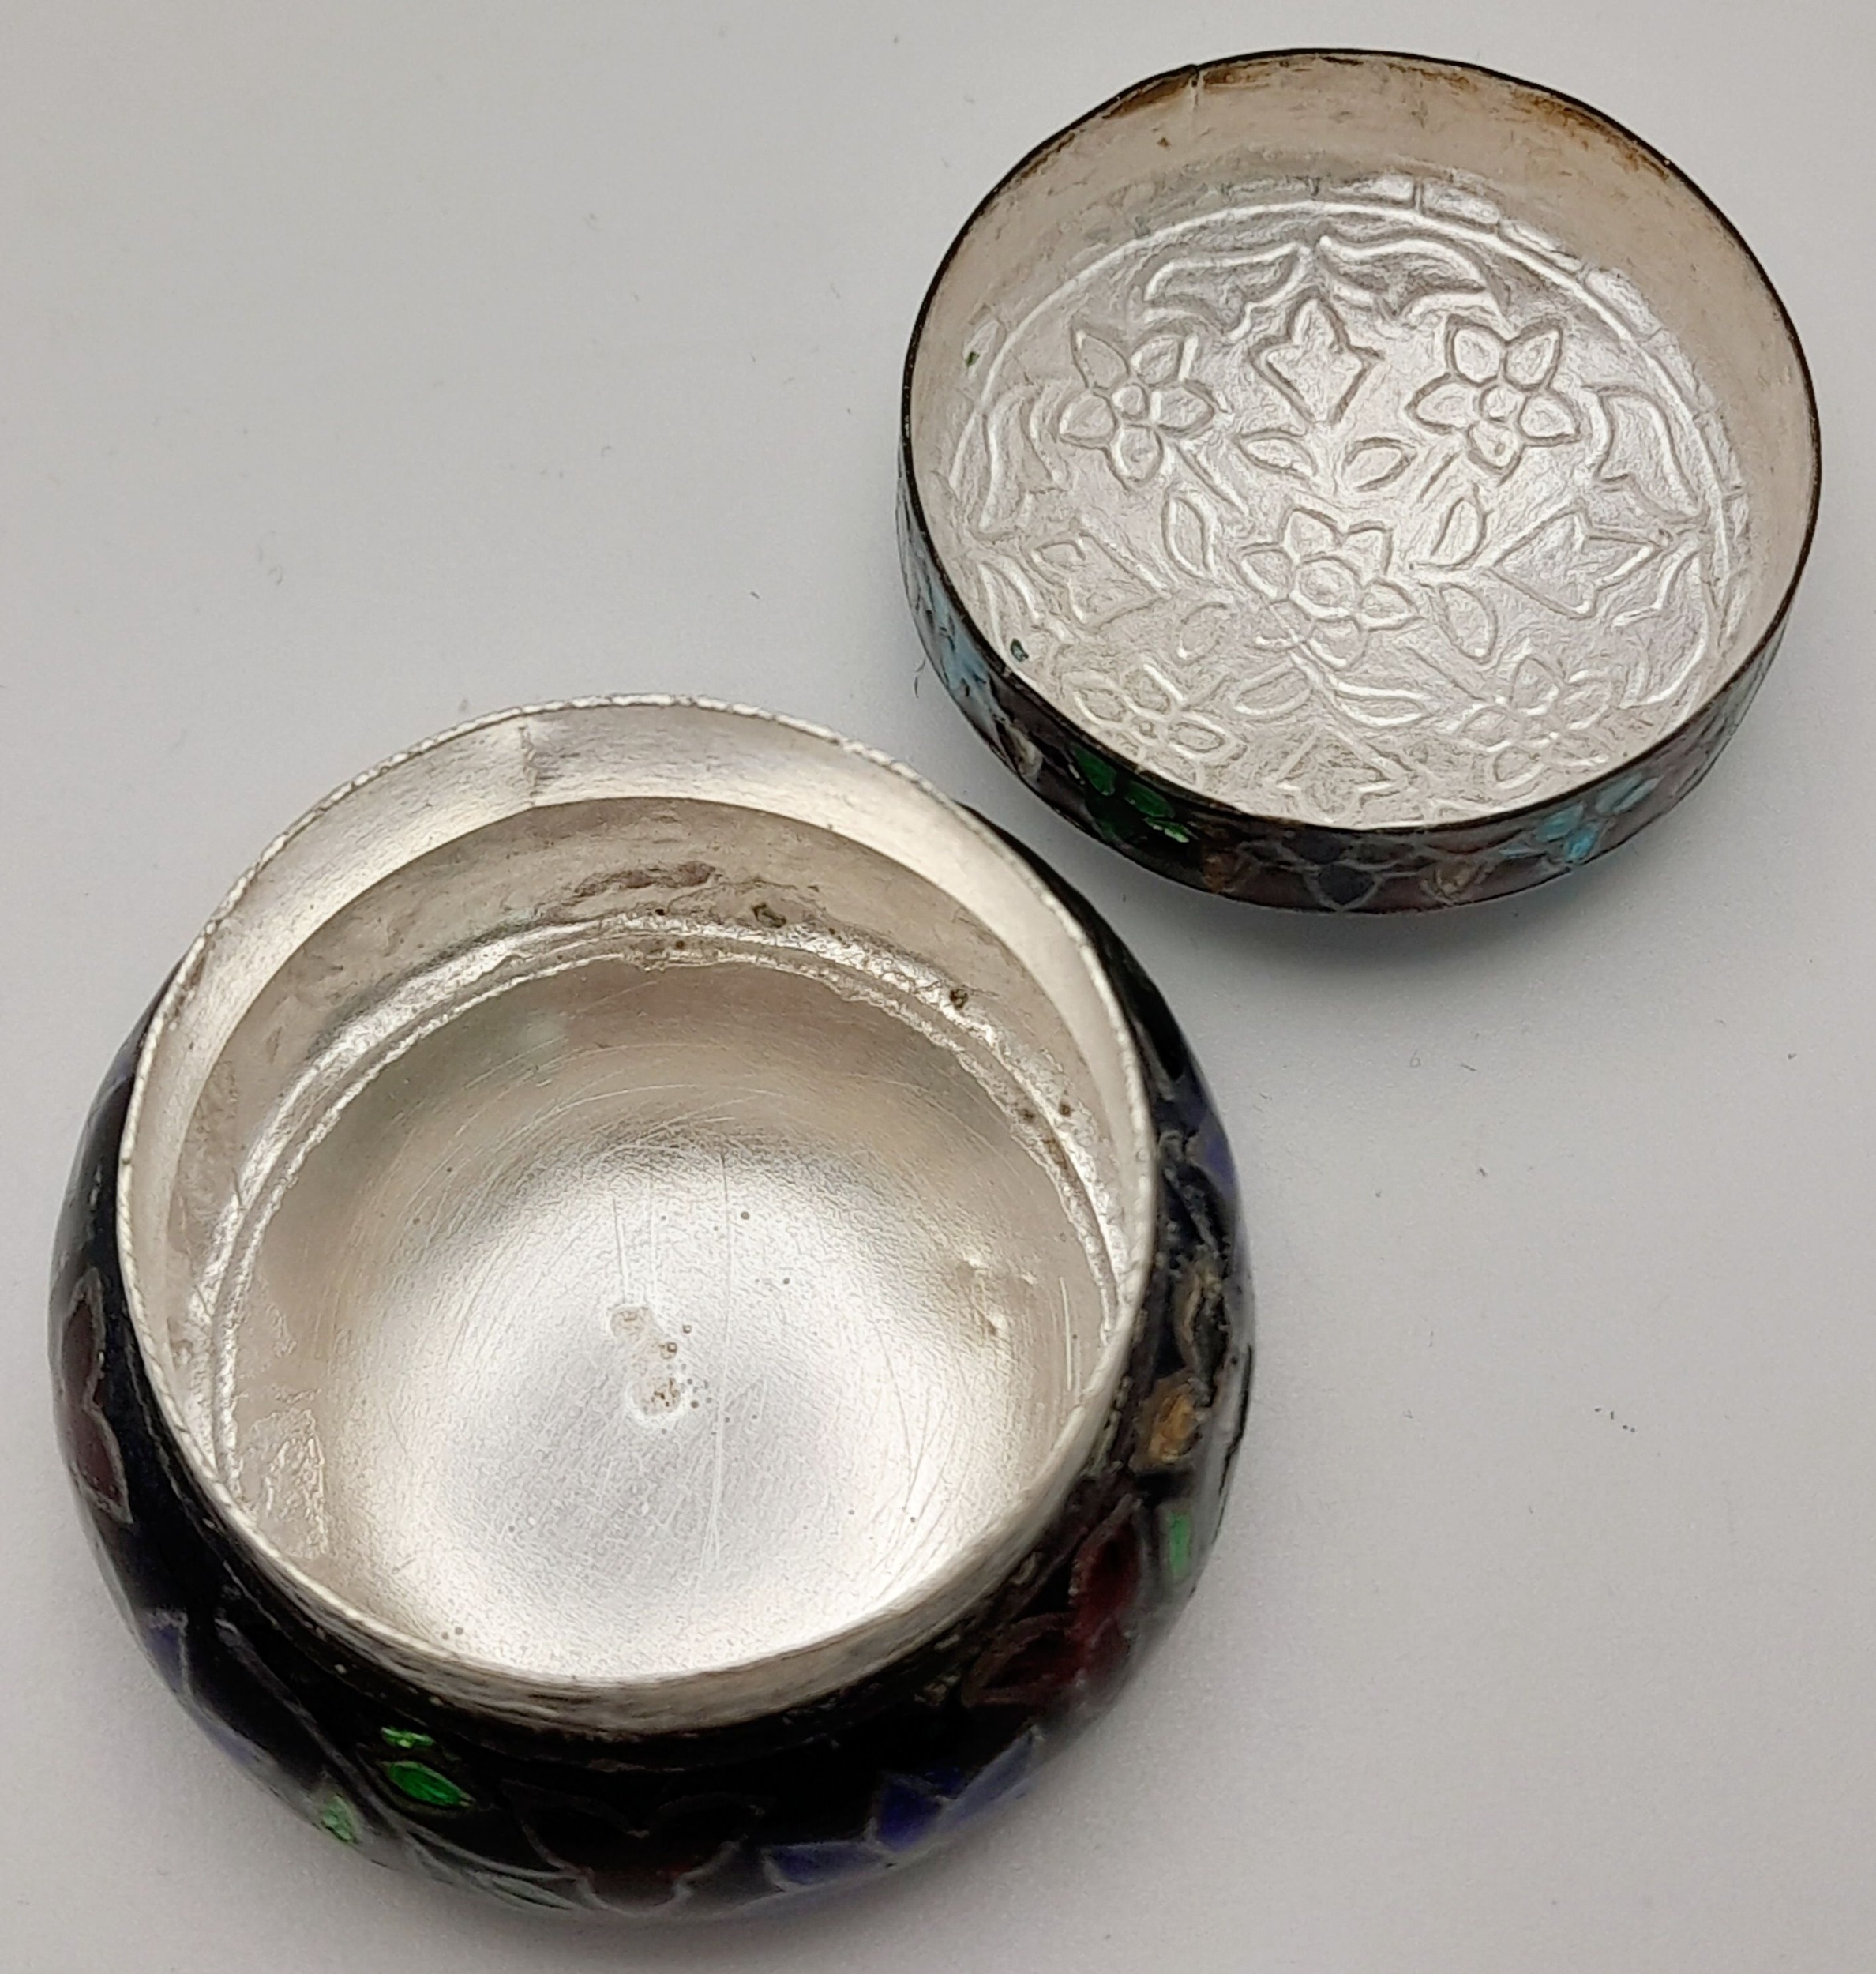 A DELIGHTFUL ENAMELLED SILVER PILL BOX . 22gms 3cms IN HEIGHT - Image 5 of 6